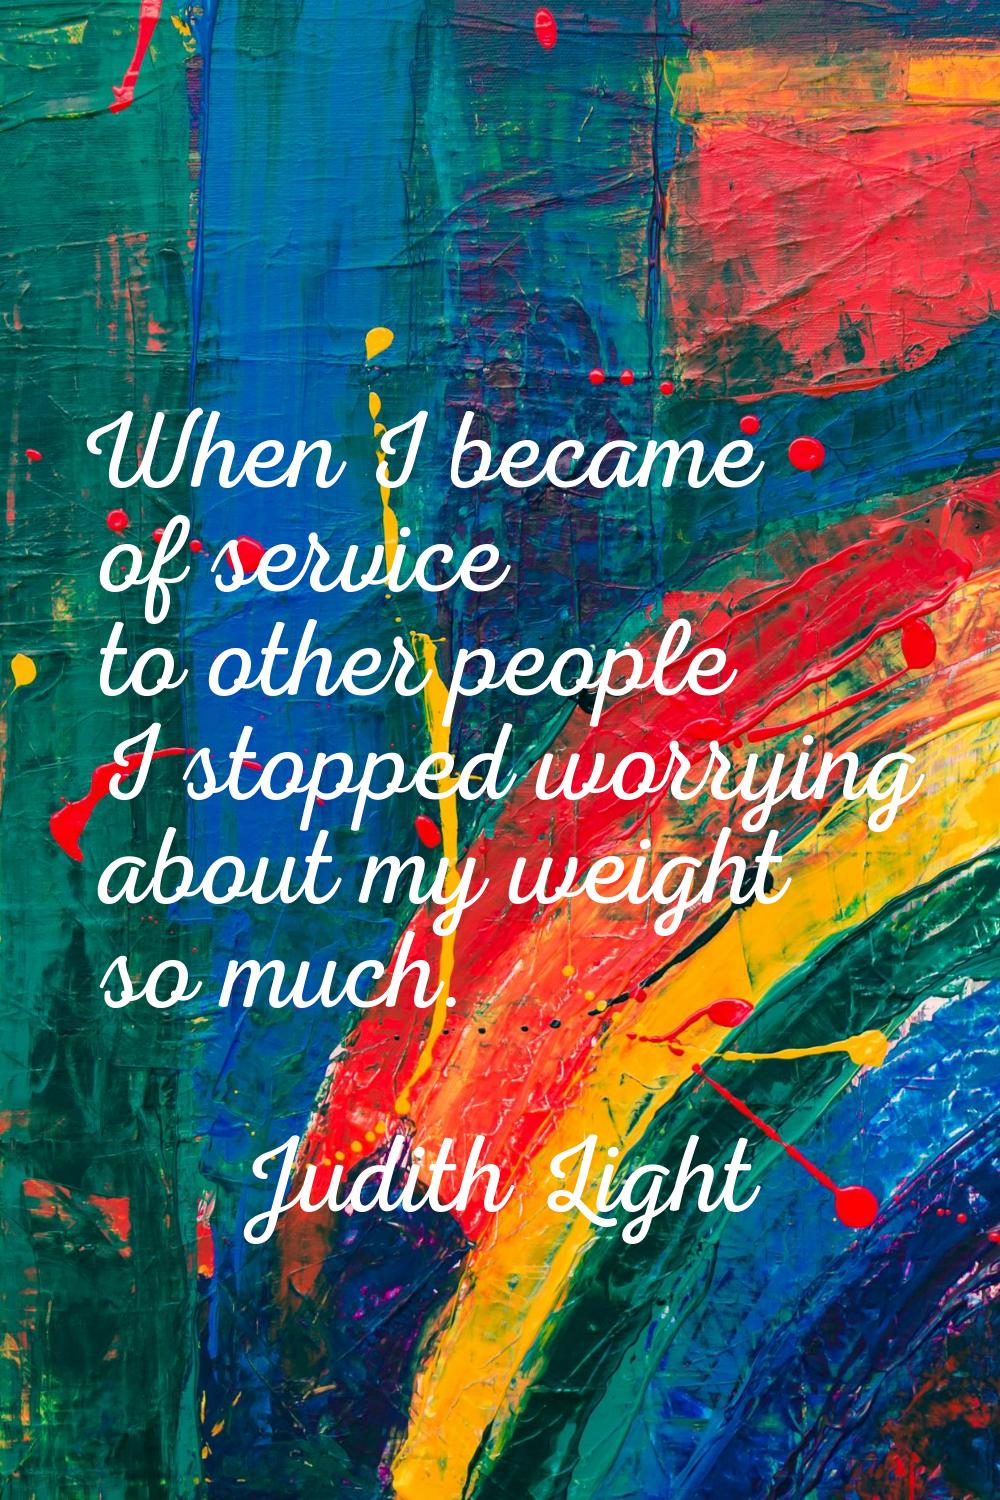 When I became of service to other people I stopped worrying about my weight so much.